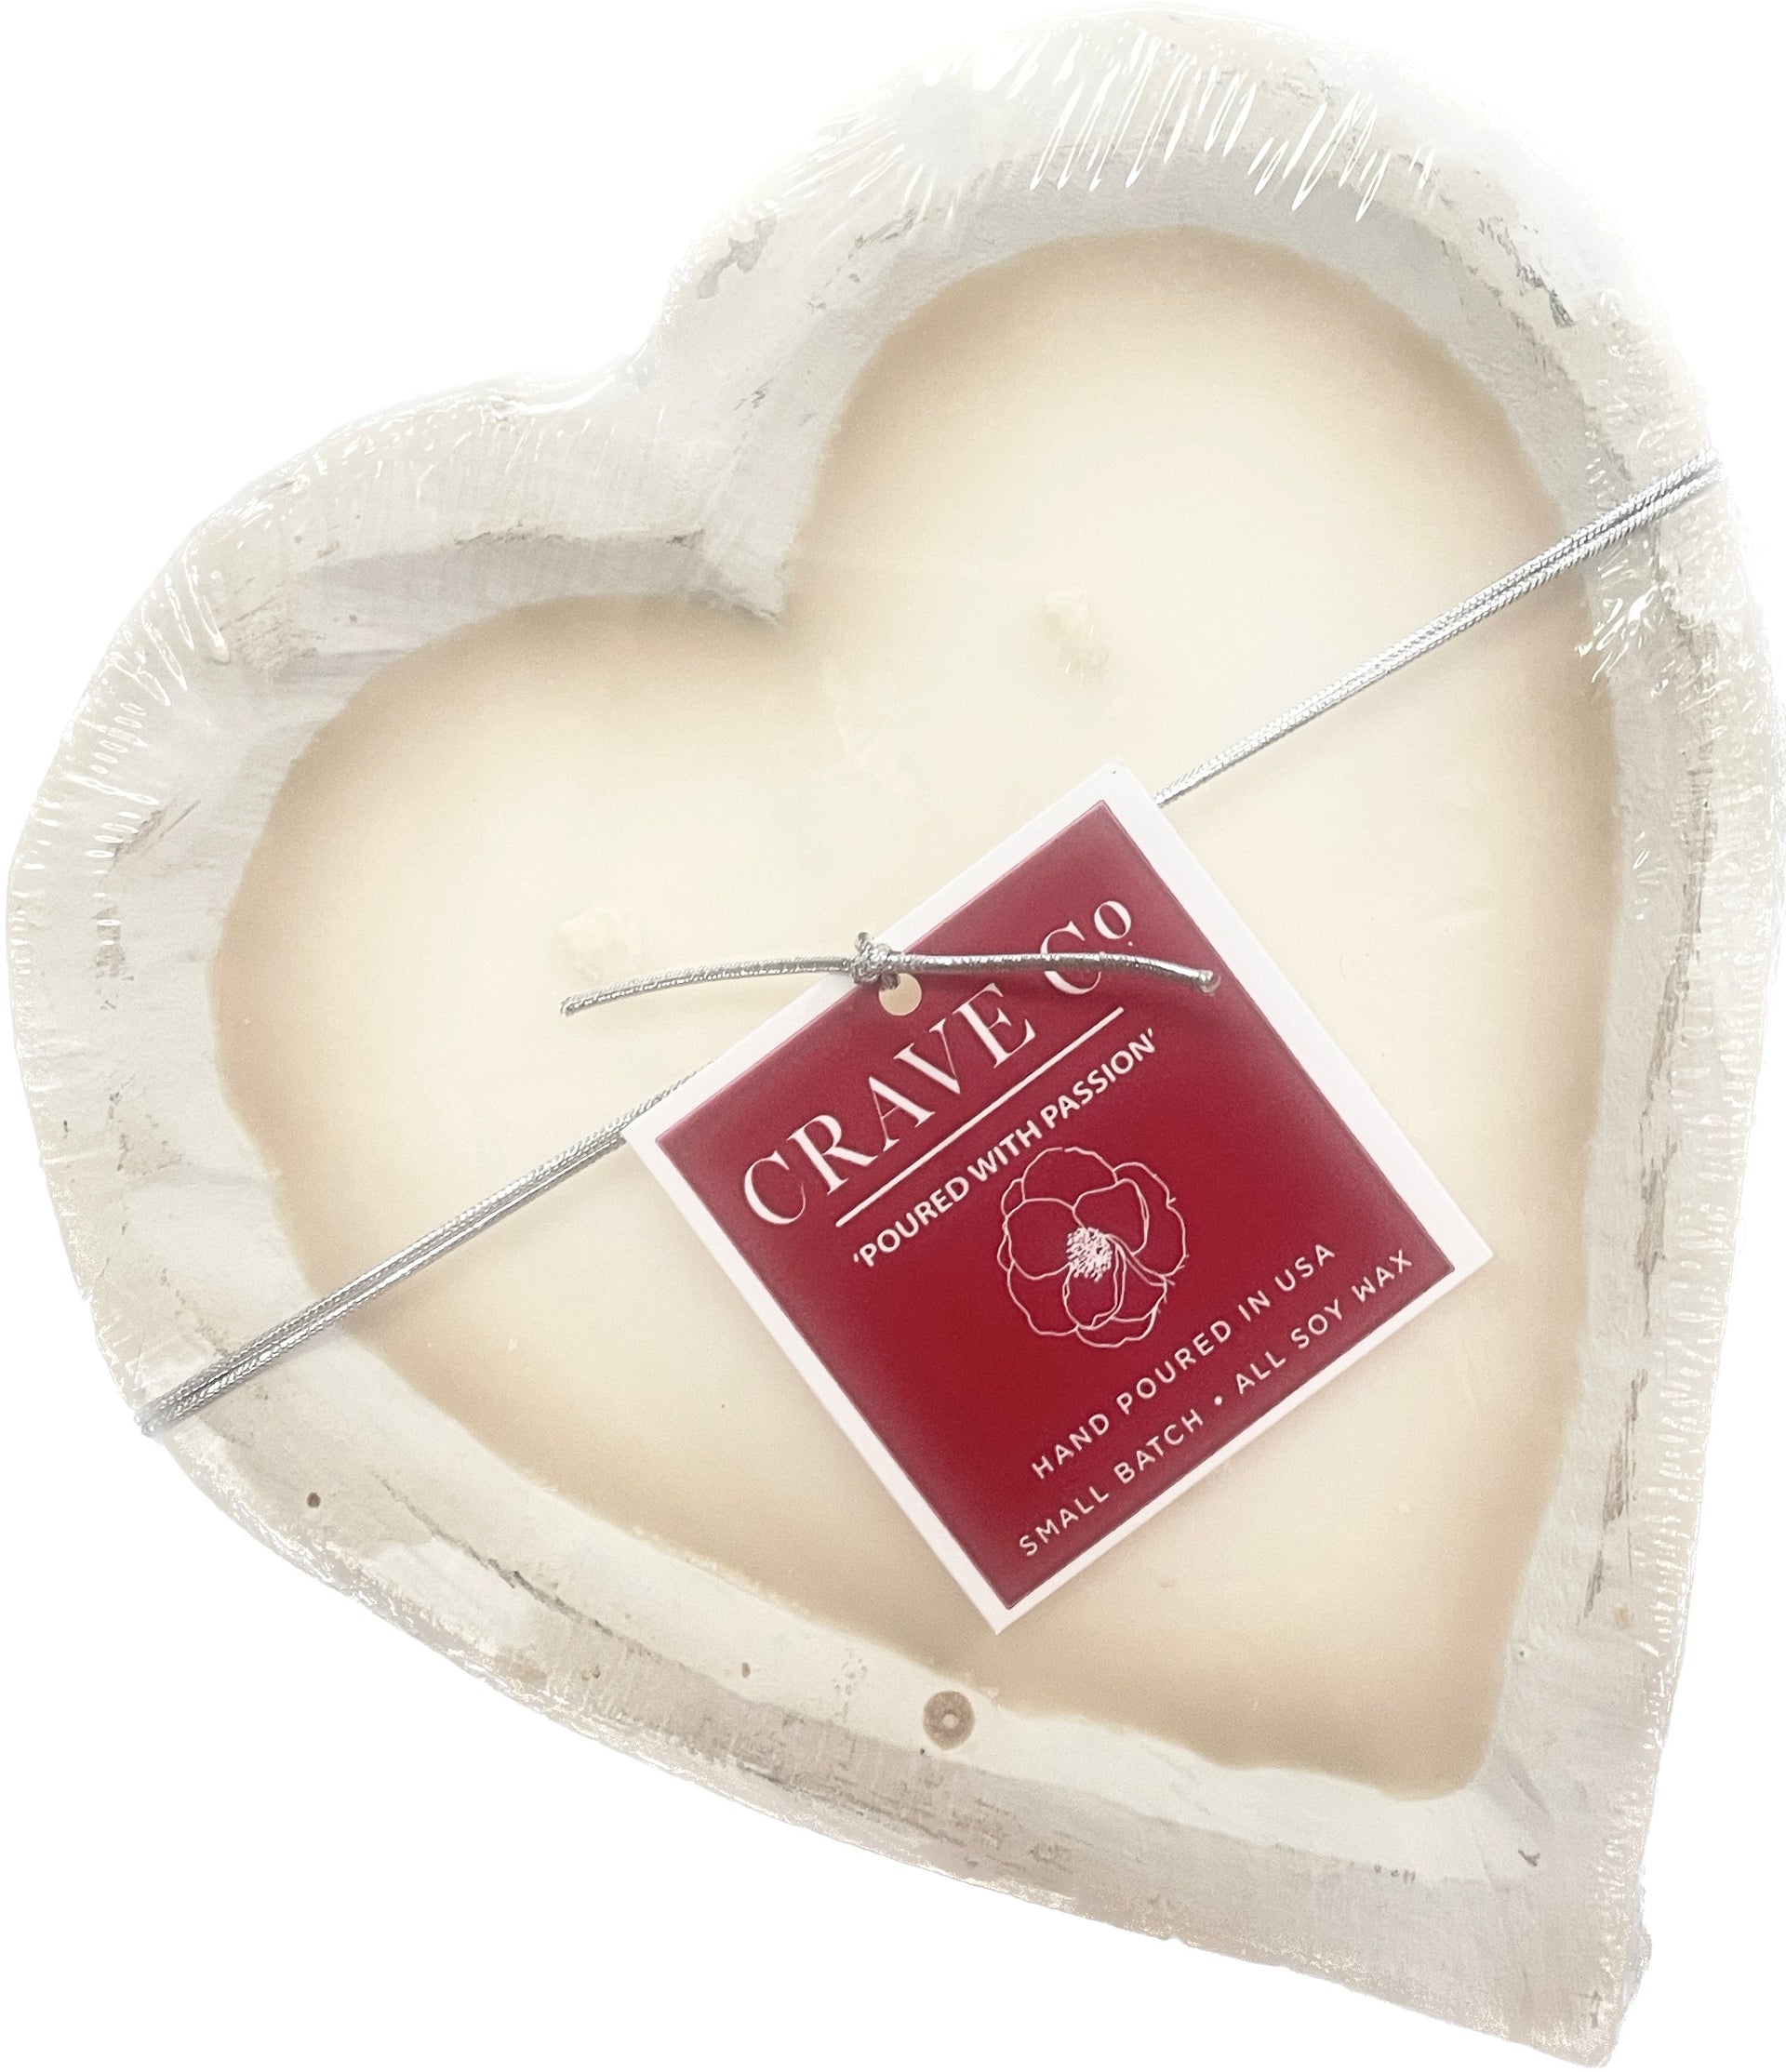 SMALL Heart Shaped Dough Bowl Candle – 83 Main Candle Company